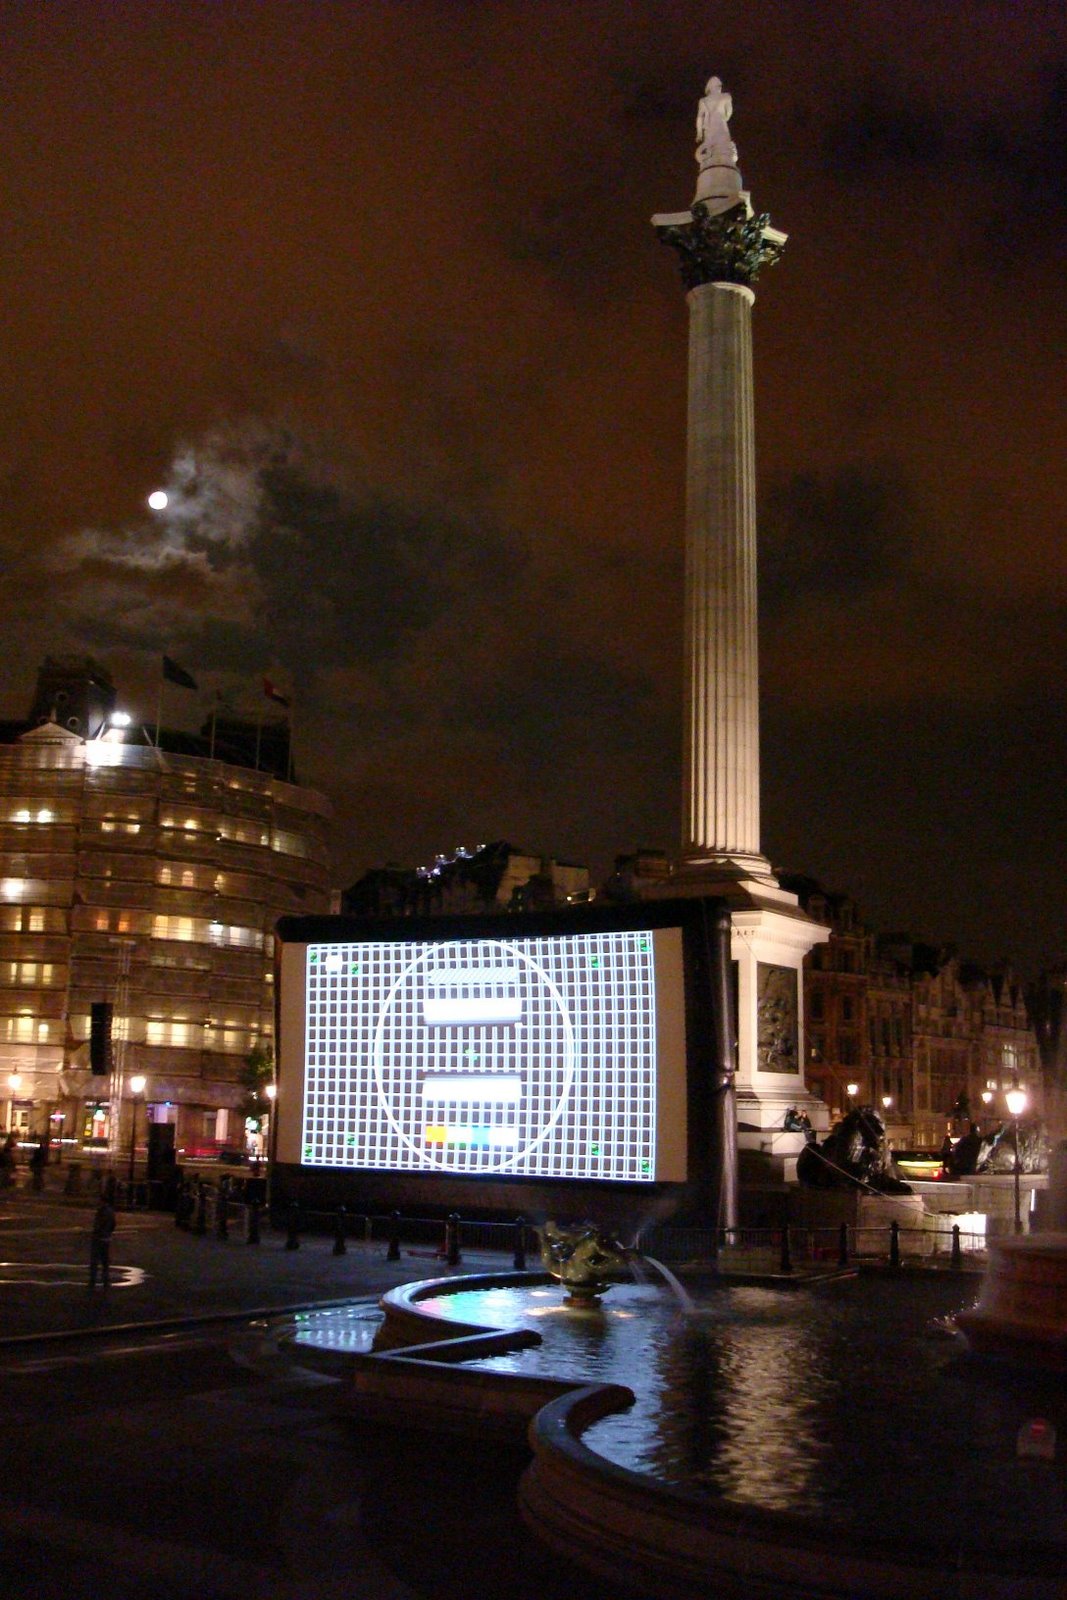 Inflatible screen in front of Nelson's Column